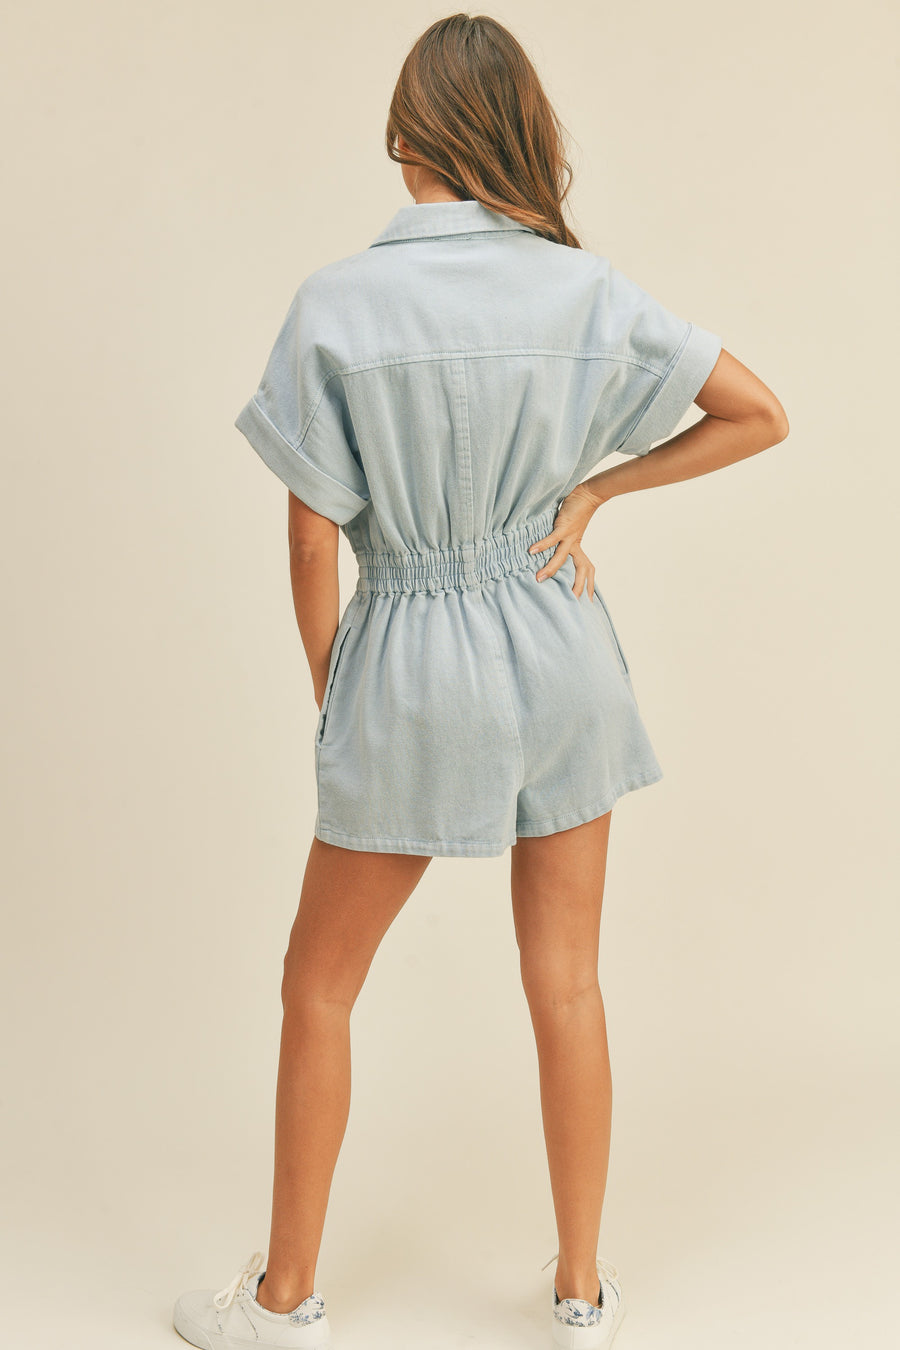 Short sleeve cotton romper with stretchy waistband.